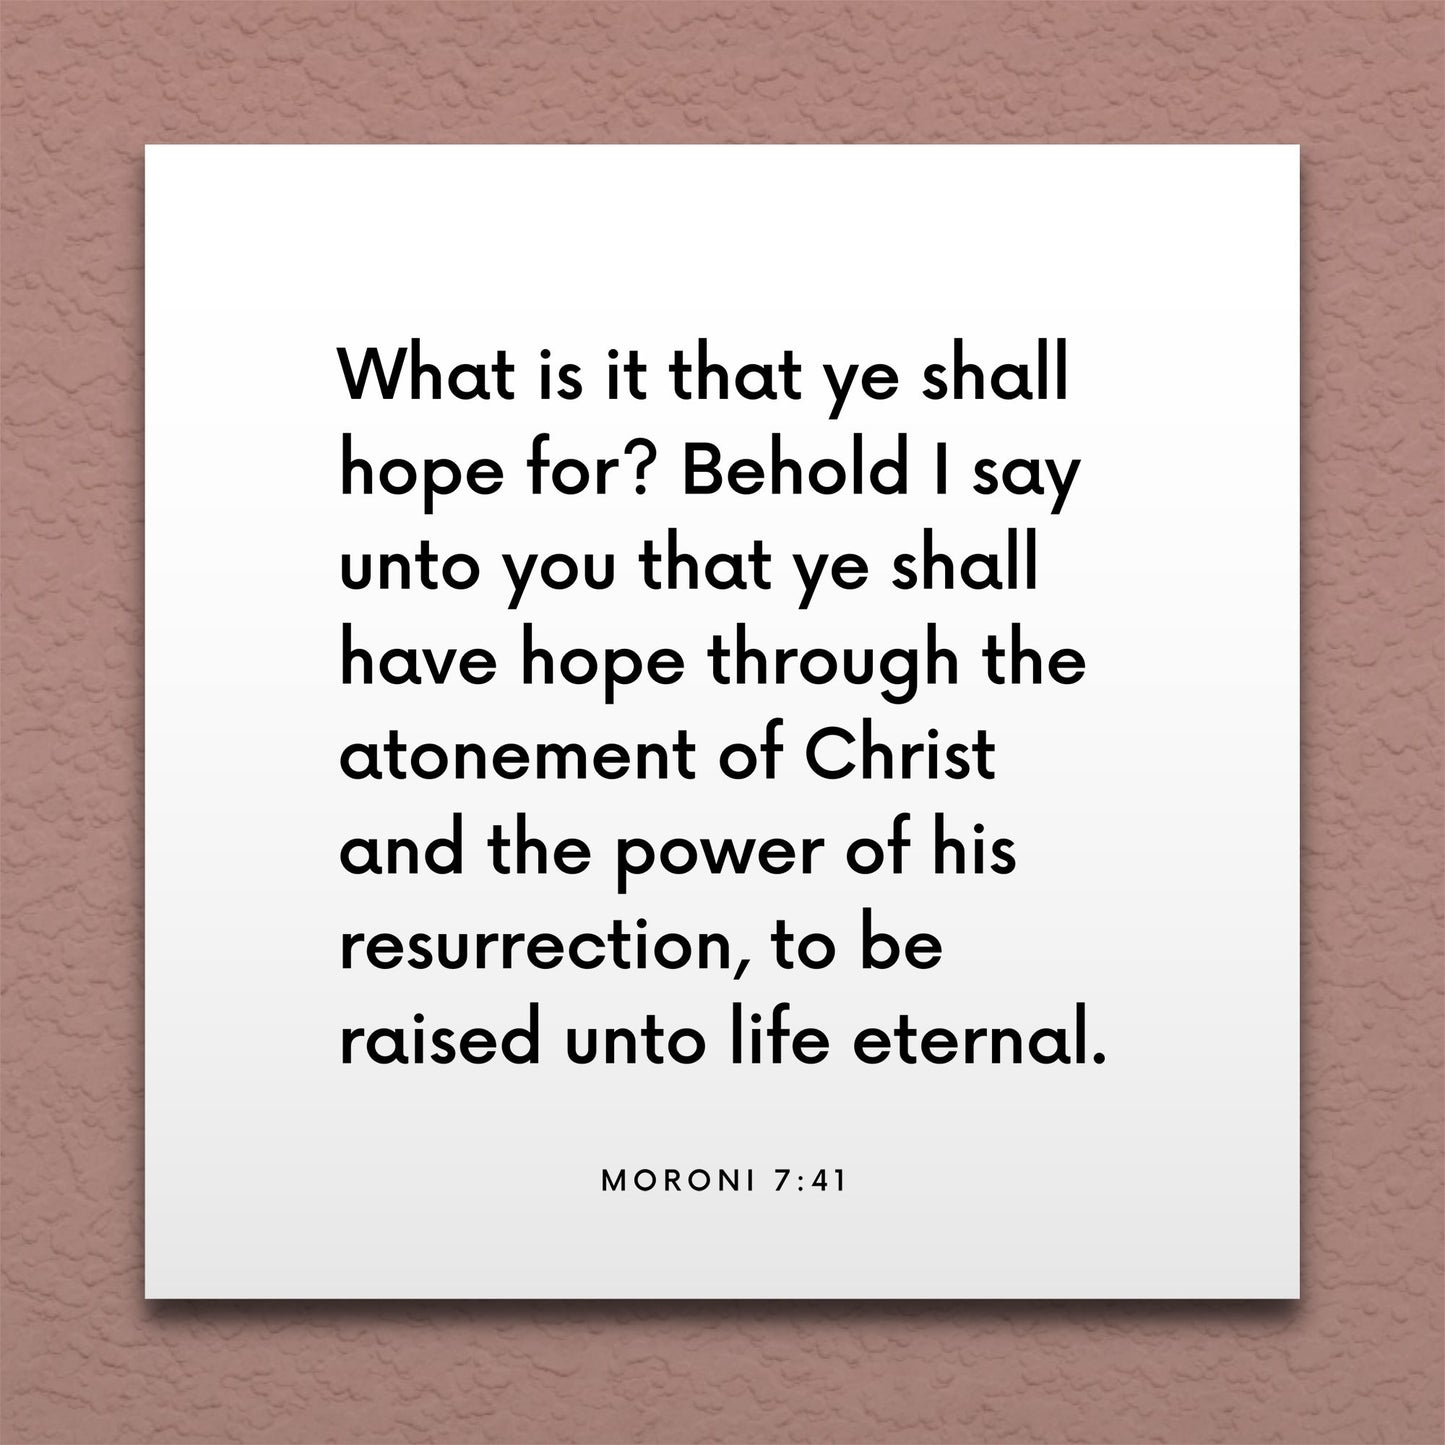 Wall-mounted scripture tile for Moroni 7:41 - "Ye shall have hope through the atonement of Christ"